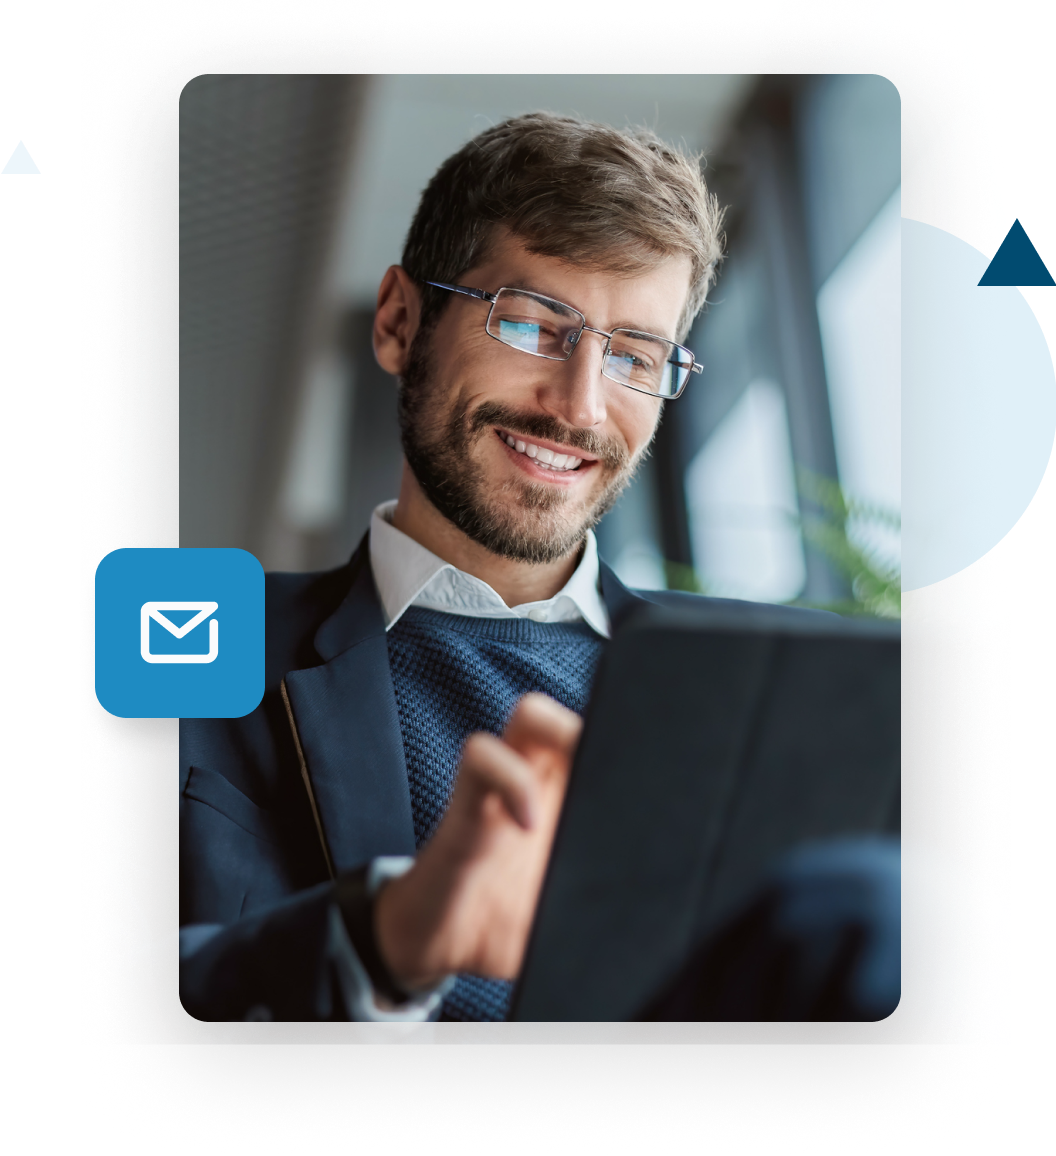 Happy business man using ZeroBounce email validation from an iPad to improve email deliverability